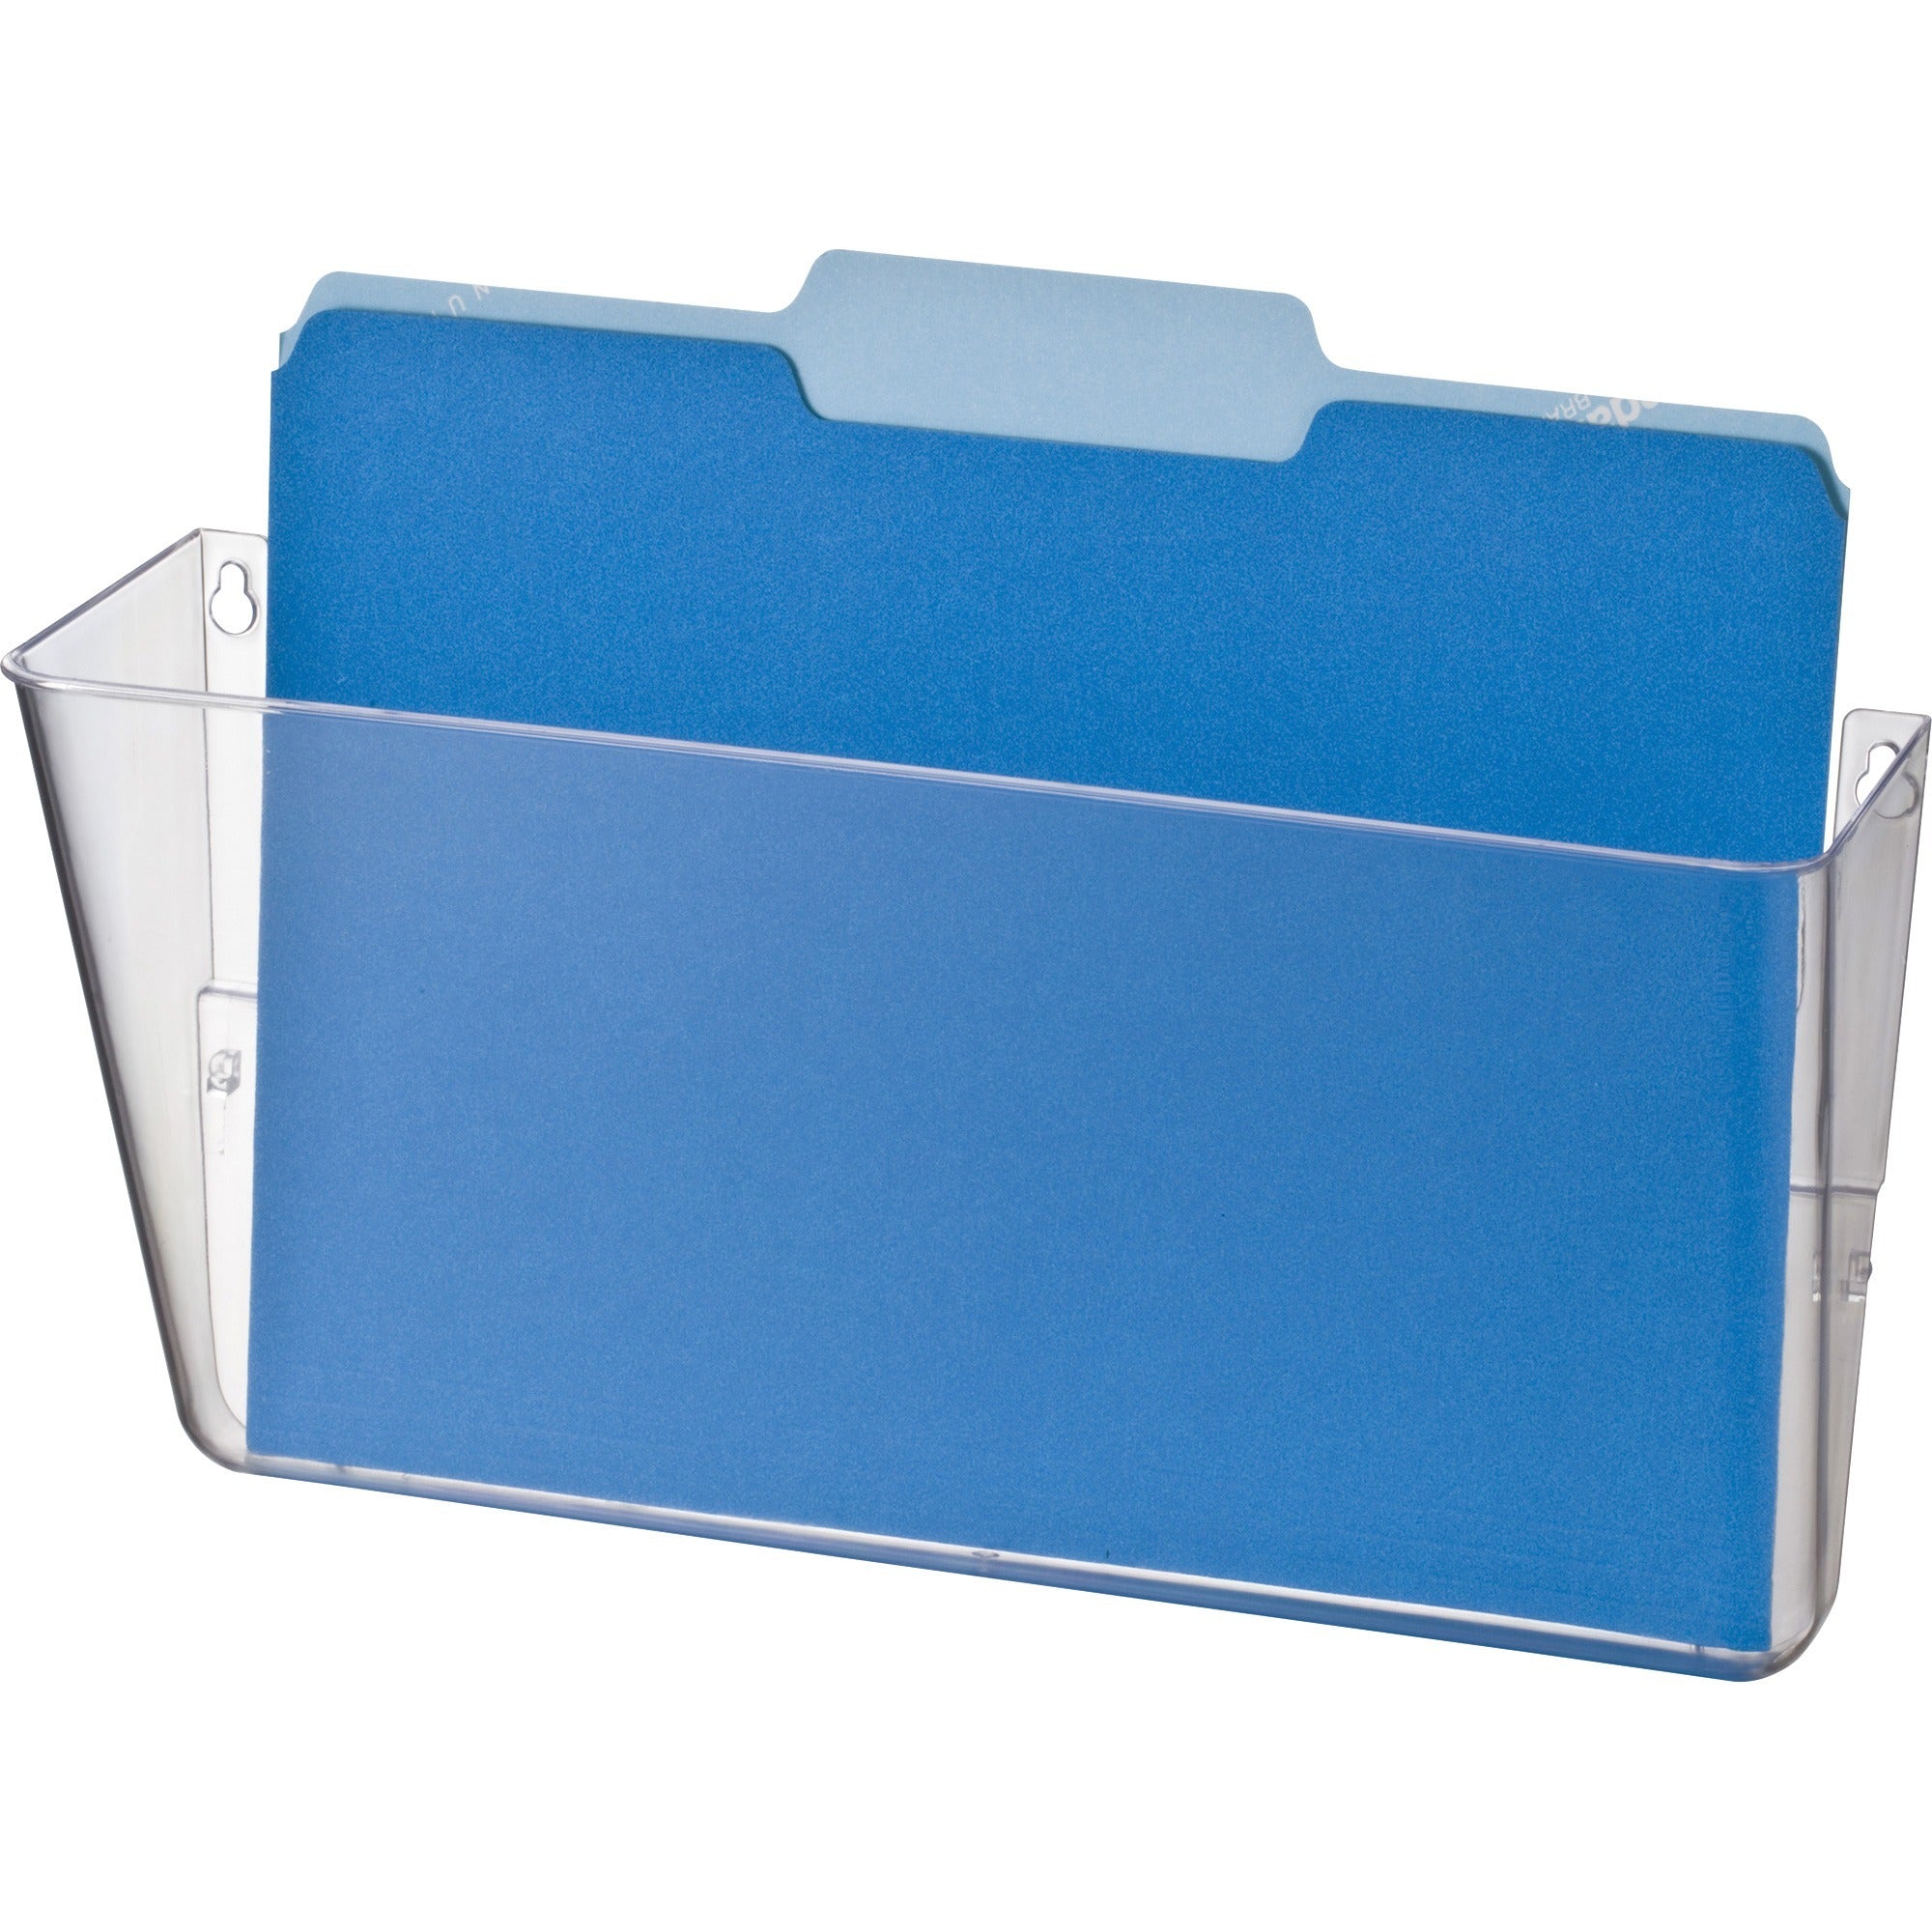 Officemate Mountable Wall File - 7" Height x 13" Width x 4.1" Depth - Clear - Plastic - 1 Each - 